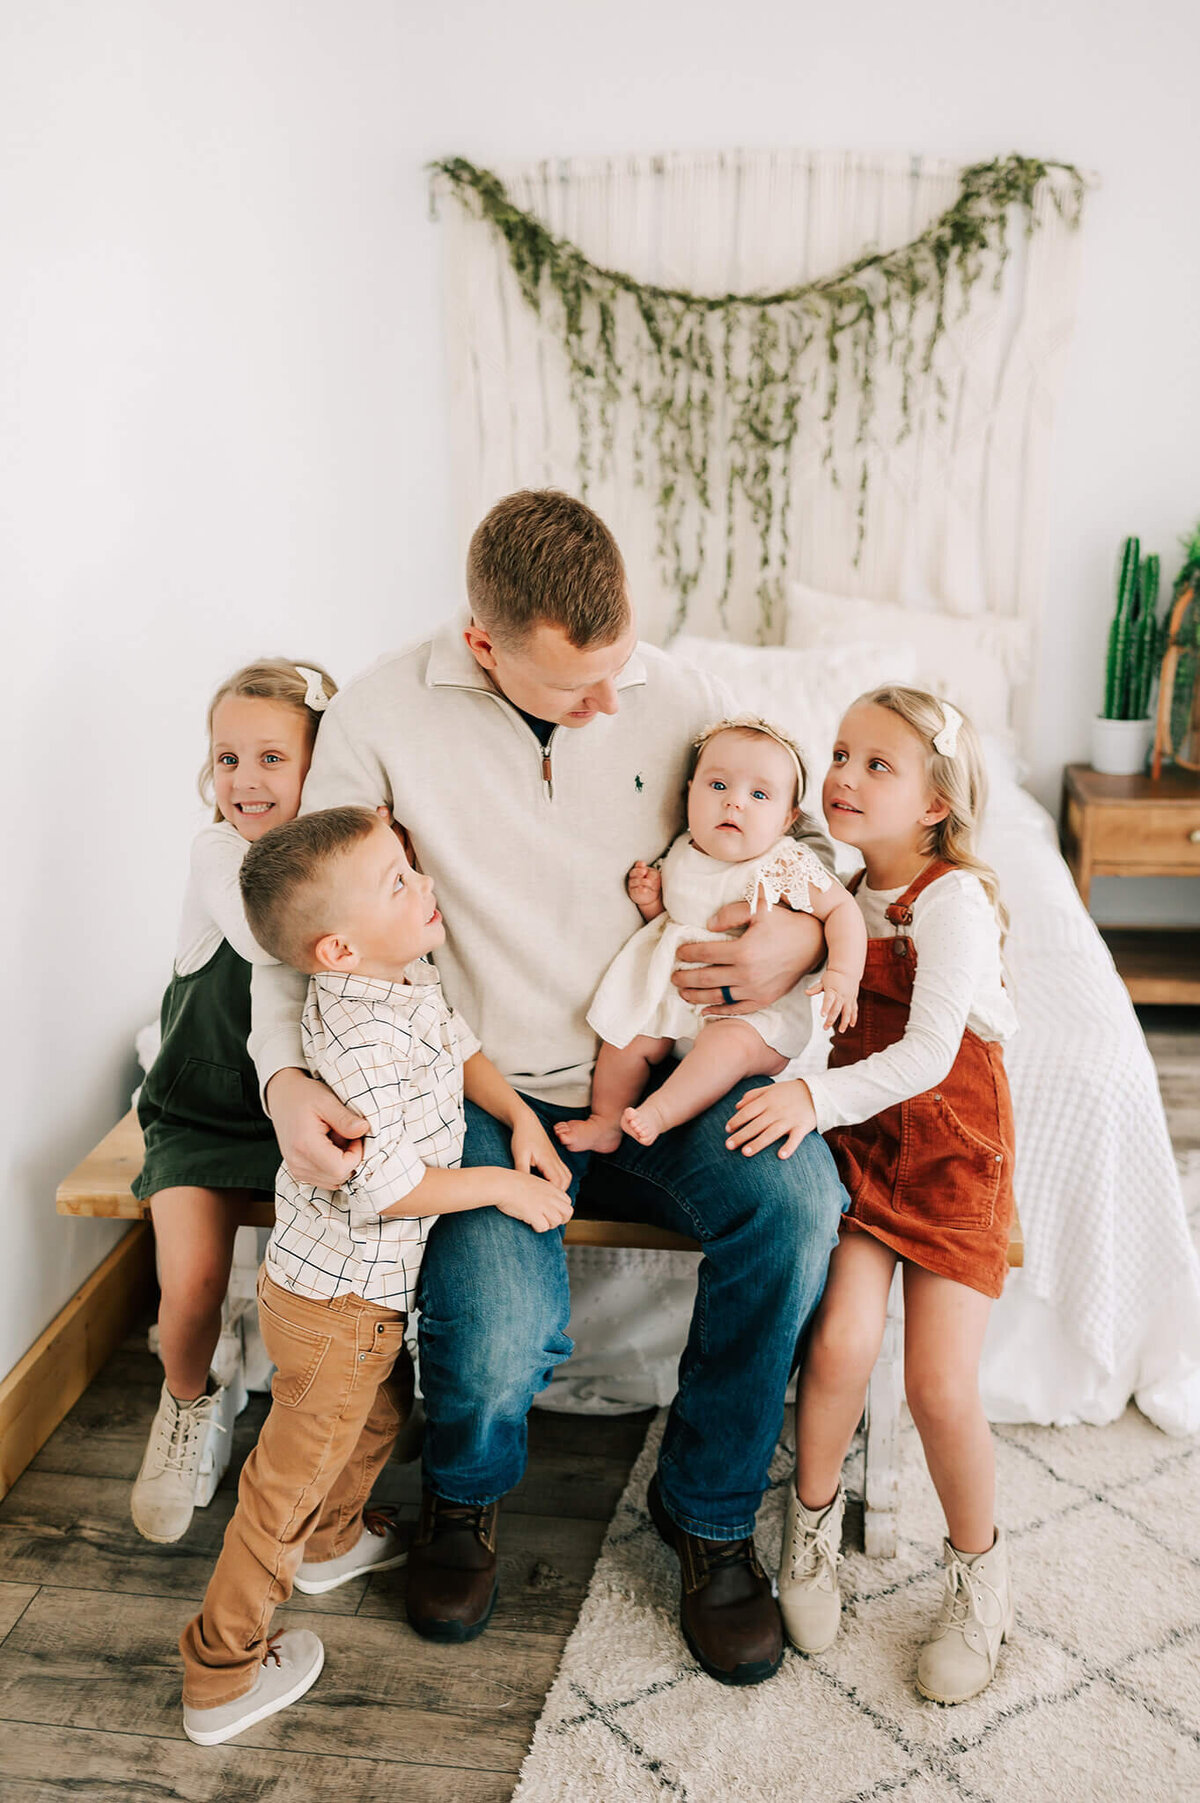 Springfield MO family photographer Jessica Kennedy of The XO Photography captures dad cuddling kids